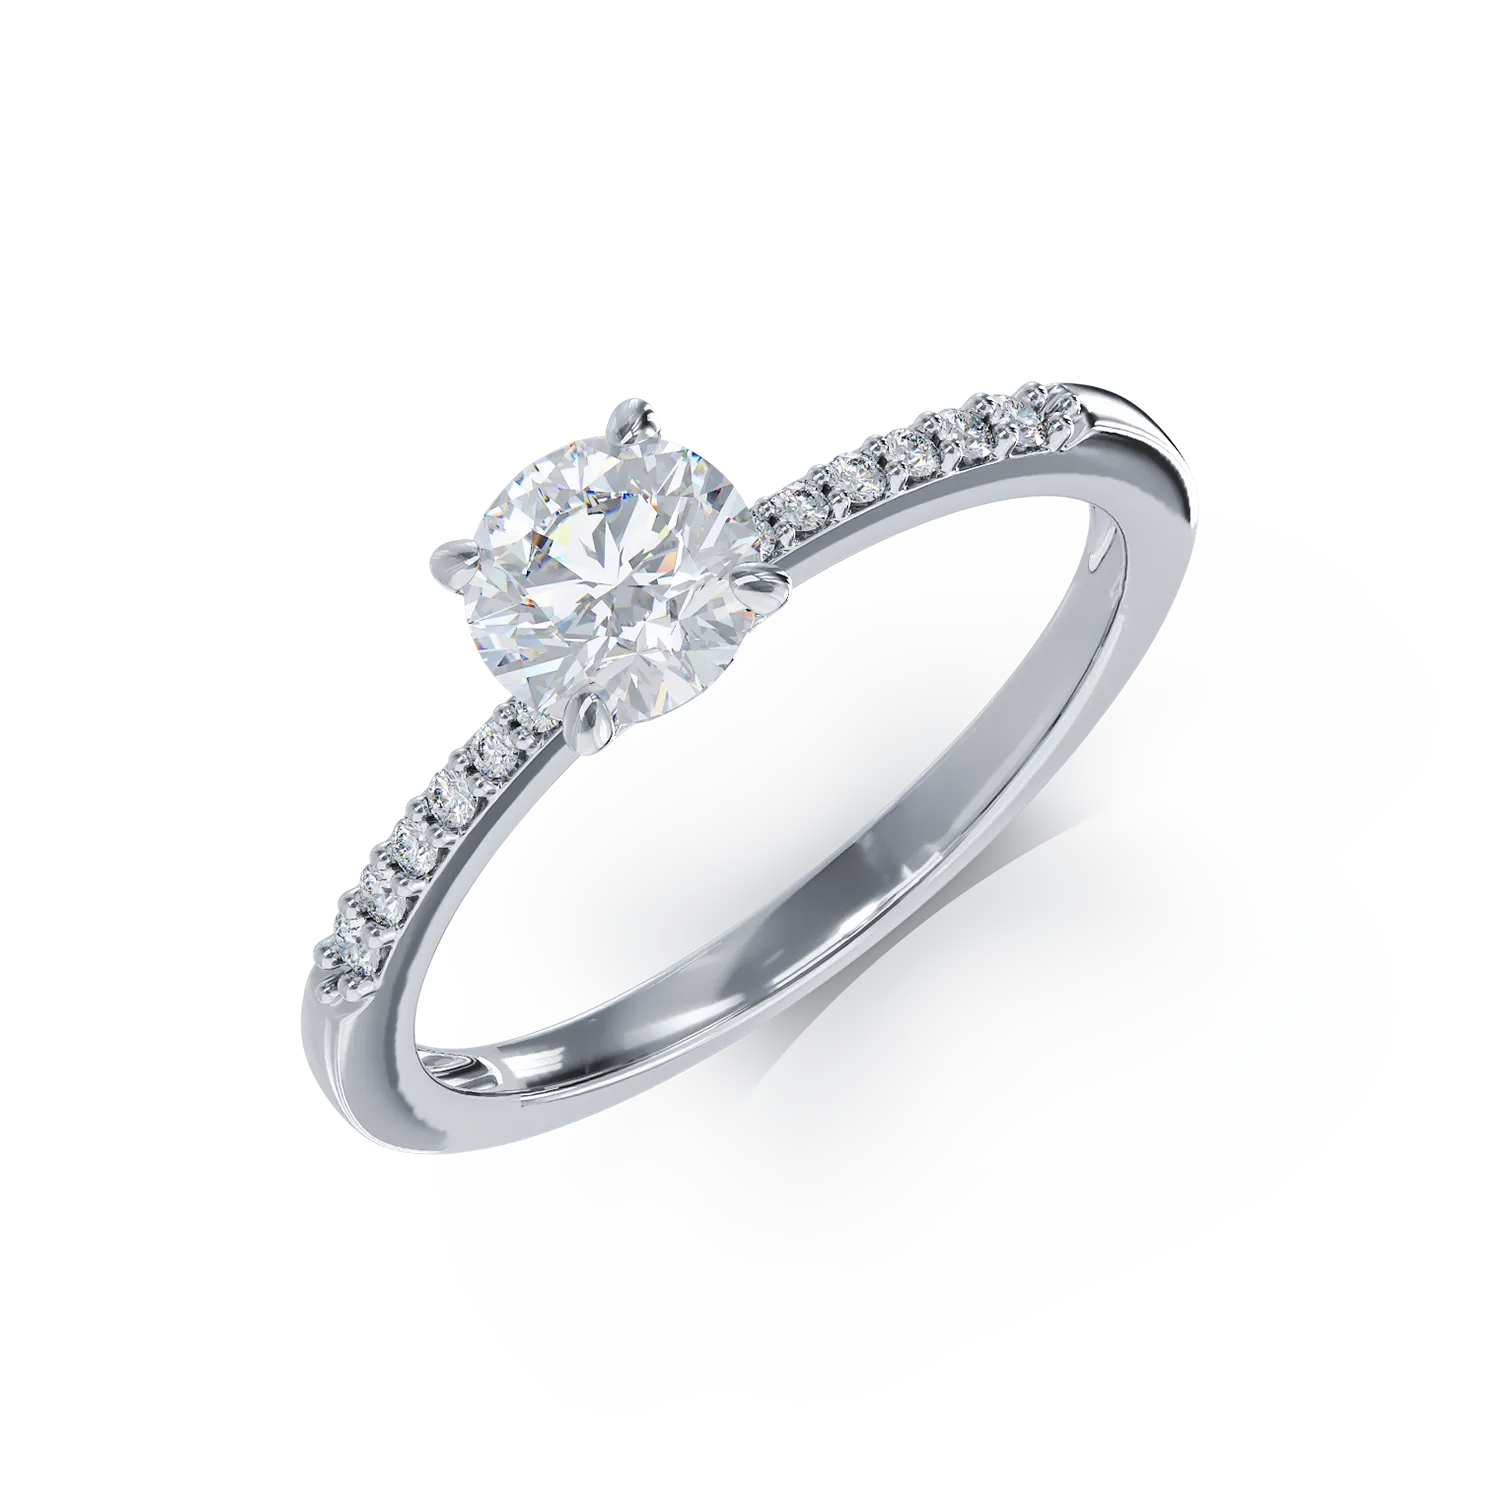 White gold engagement ring with zirconia